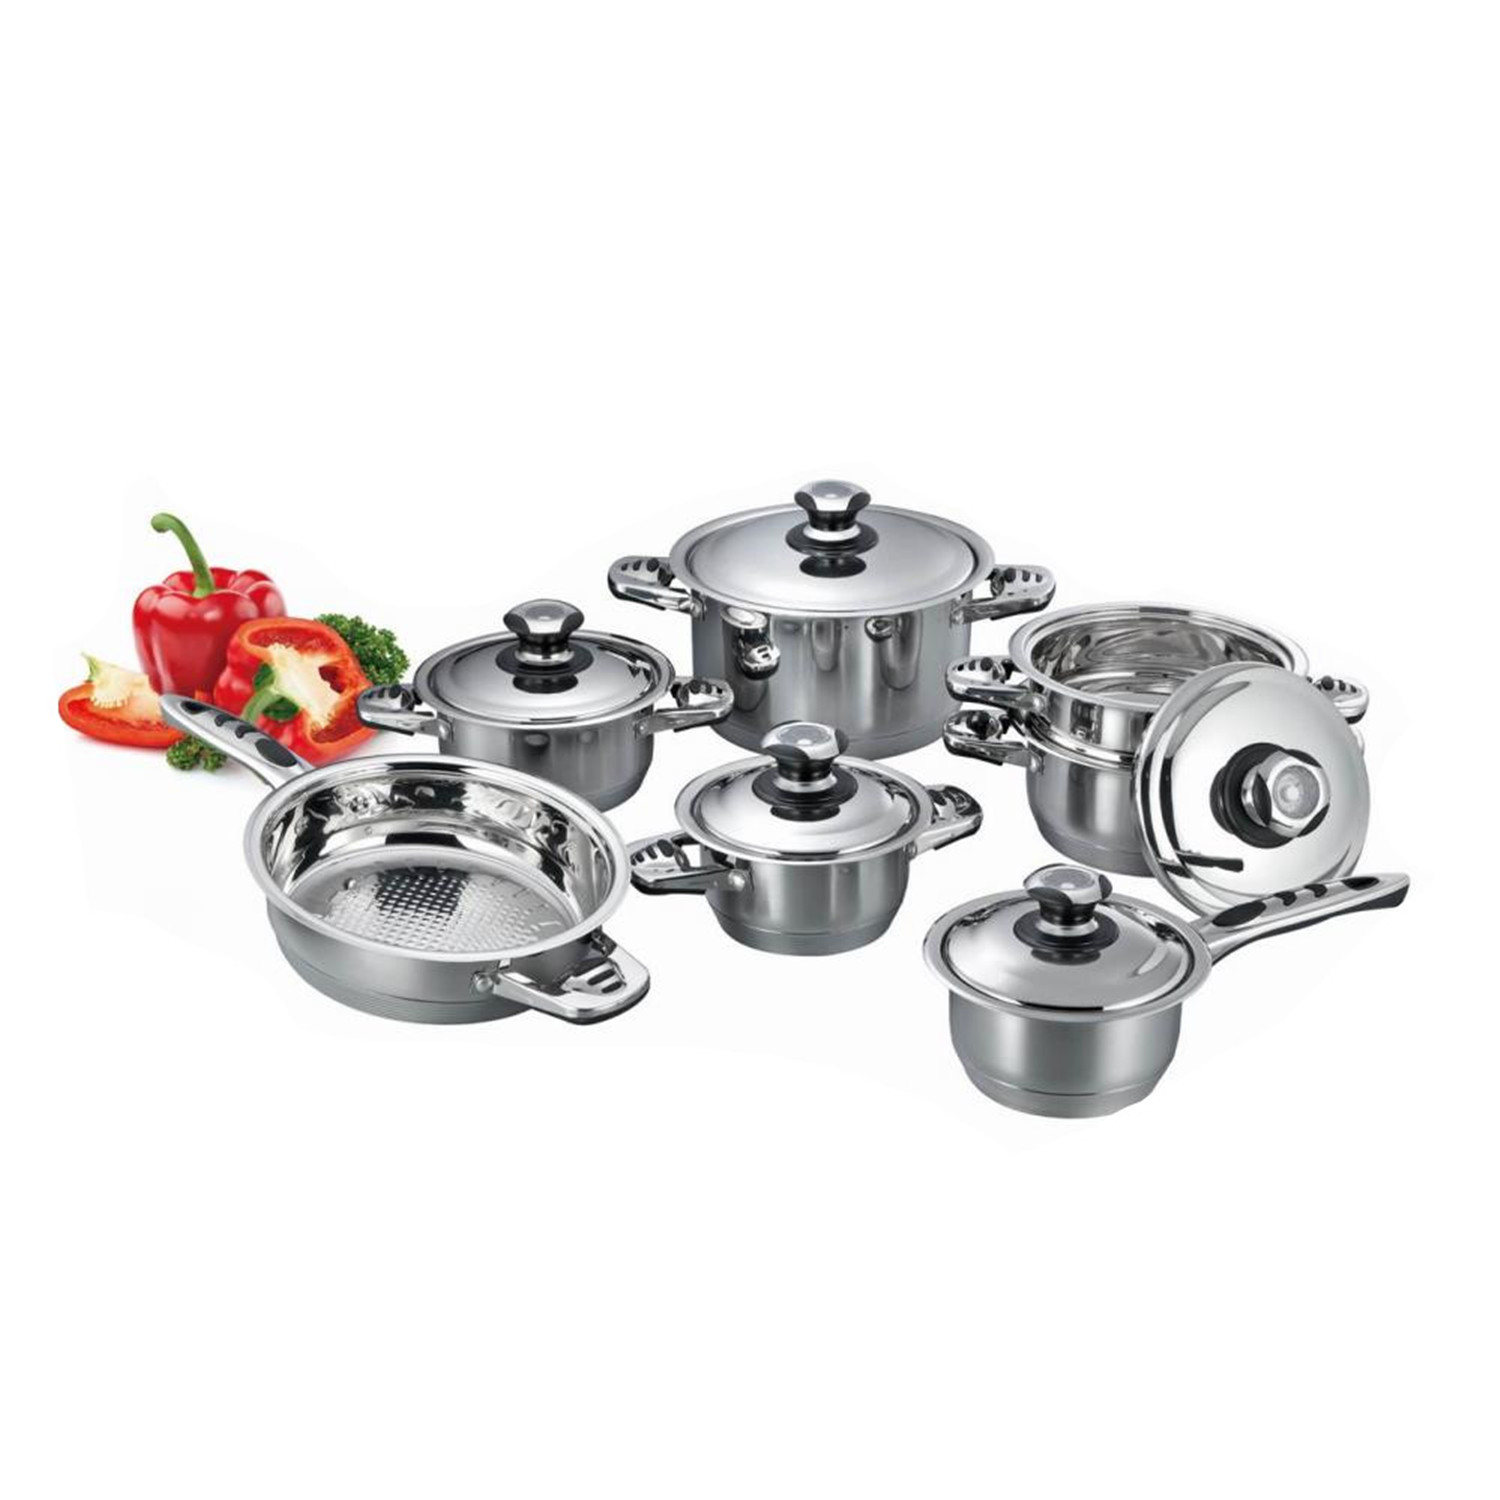 12PCS Stainless Steel Cookware in Set in Apple Shape with Gold Plated  Handle and Knob - China Kitchenware and Stainless Steel Cookware price